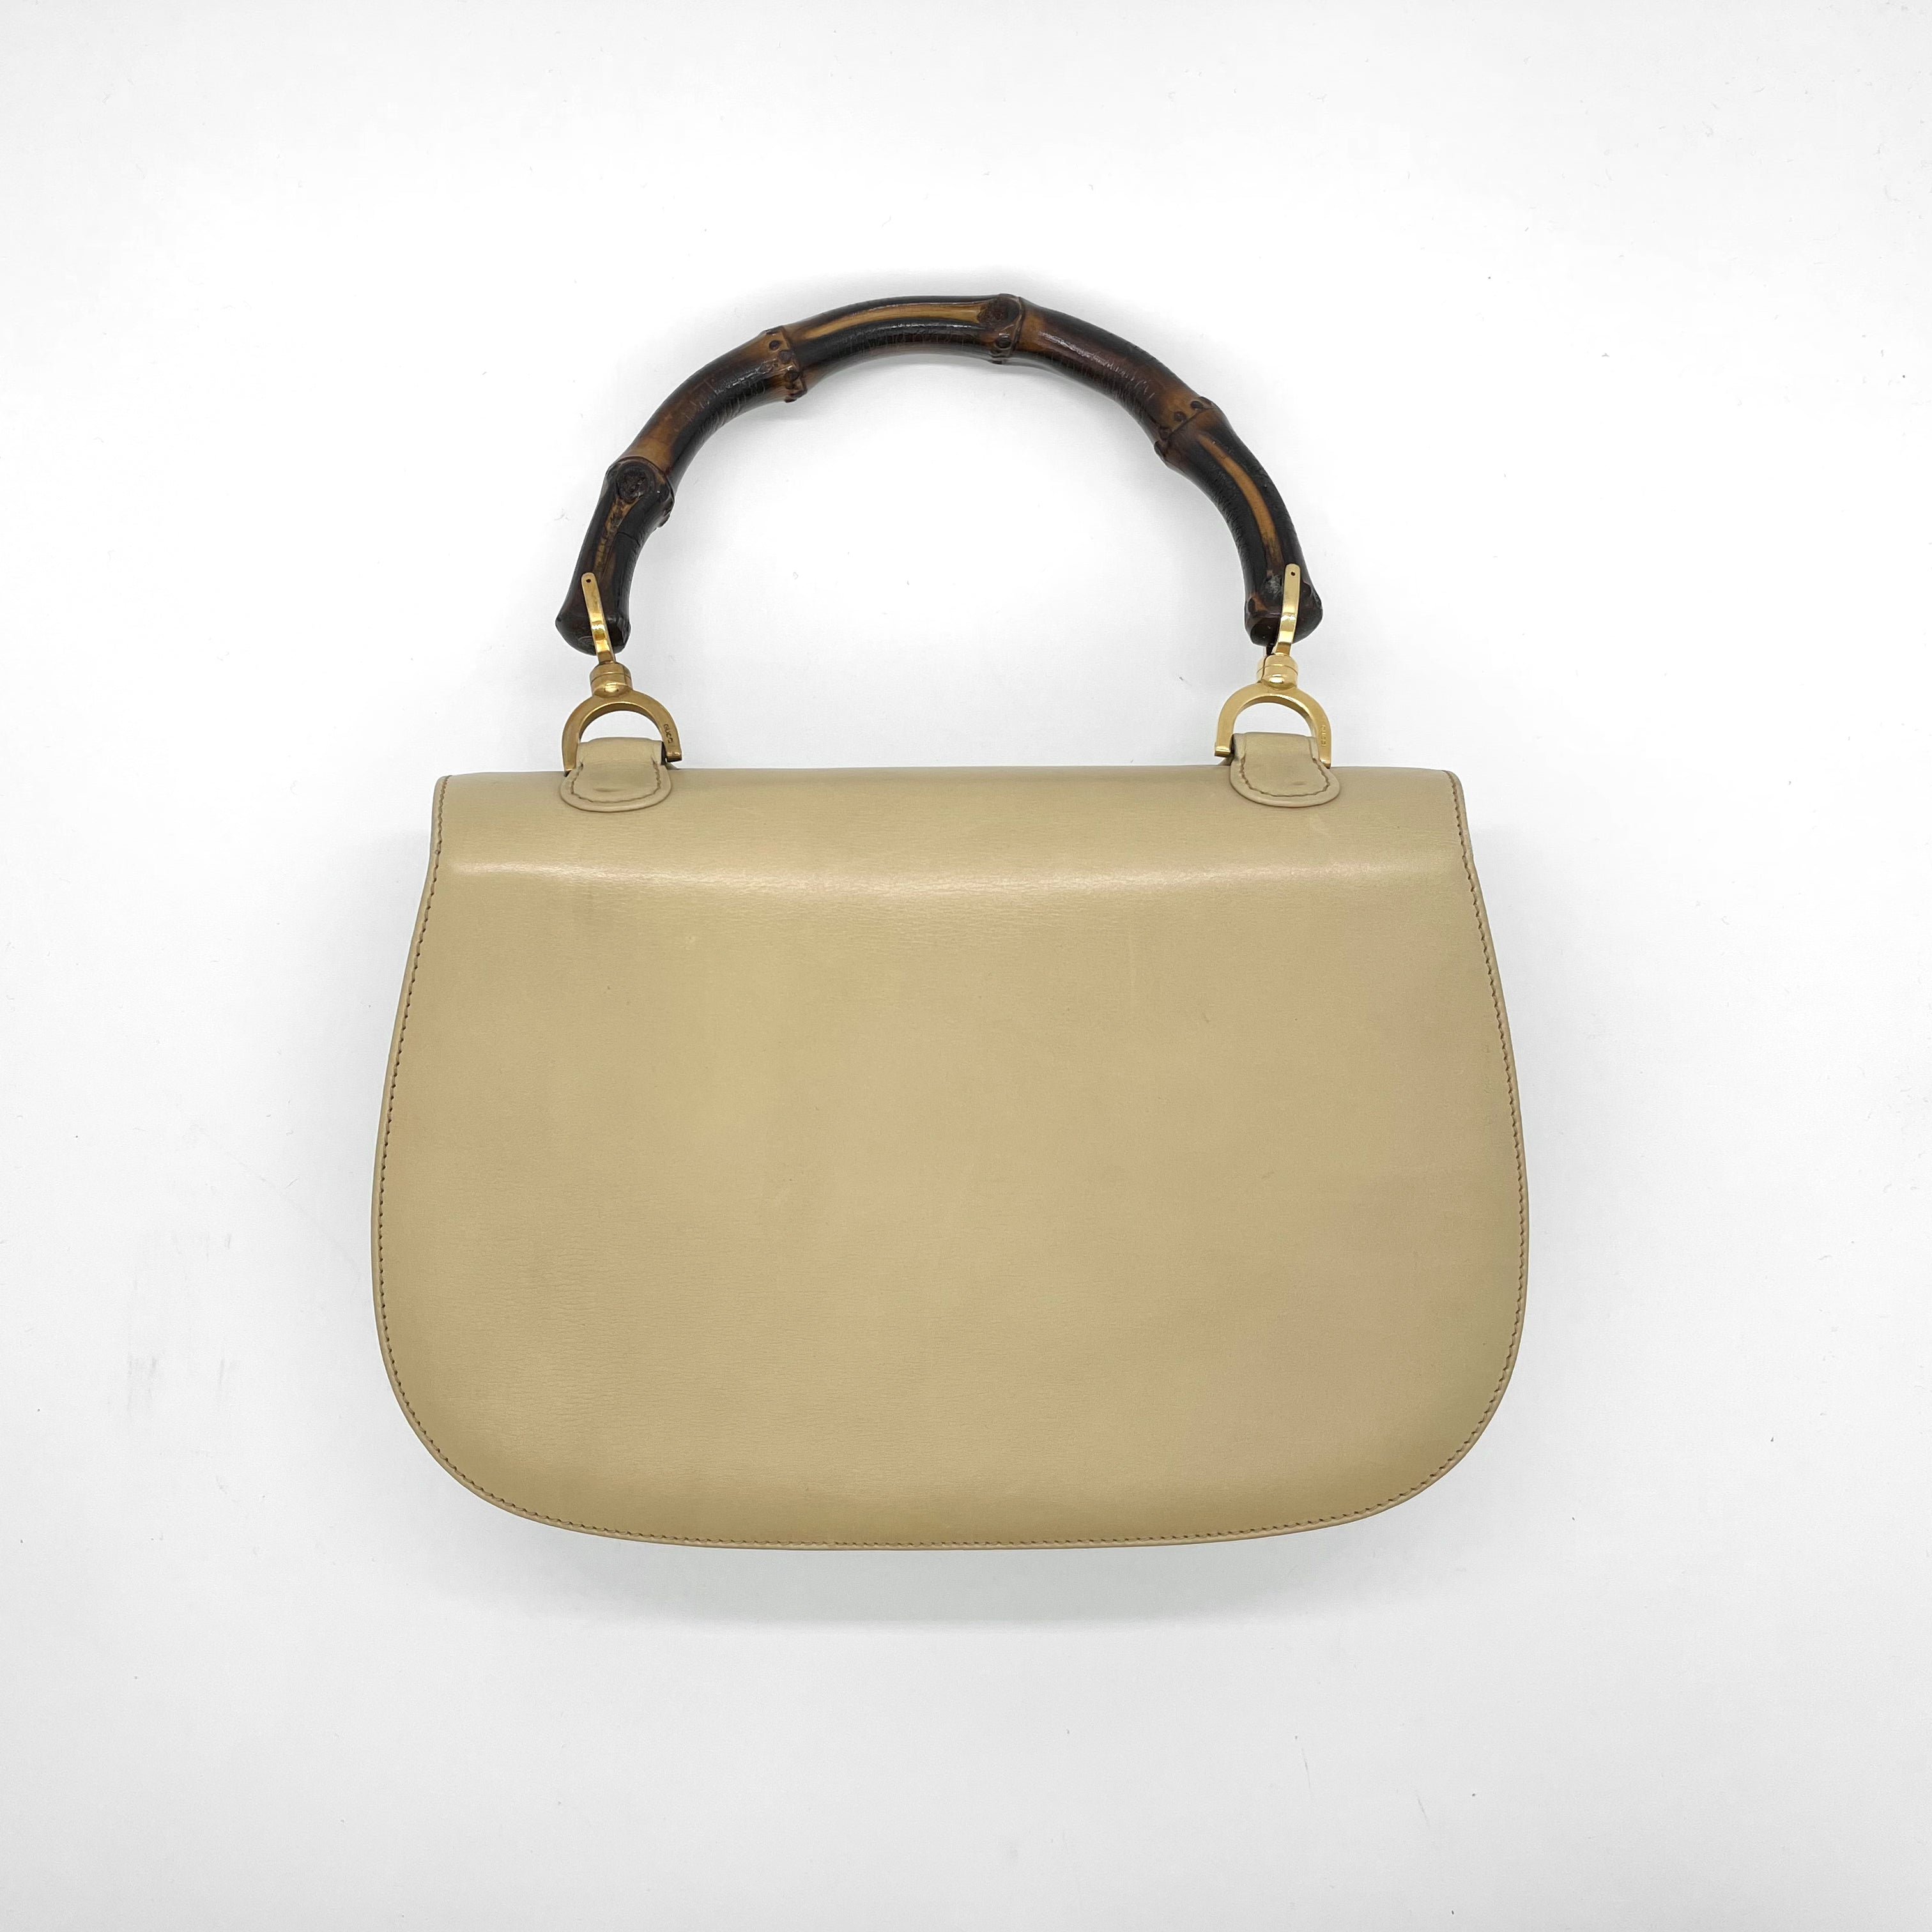 Sold at Auction: GUCCI 'LADY LOCK' BAMBOO HANDLE LEATHER HANDBAG